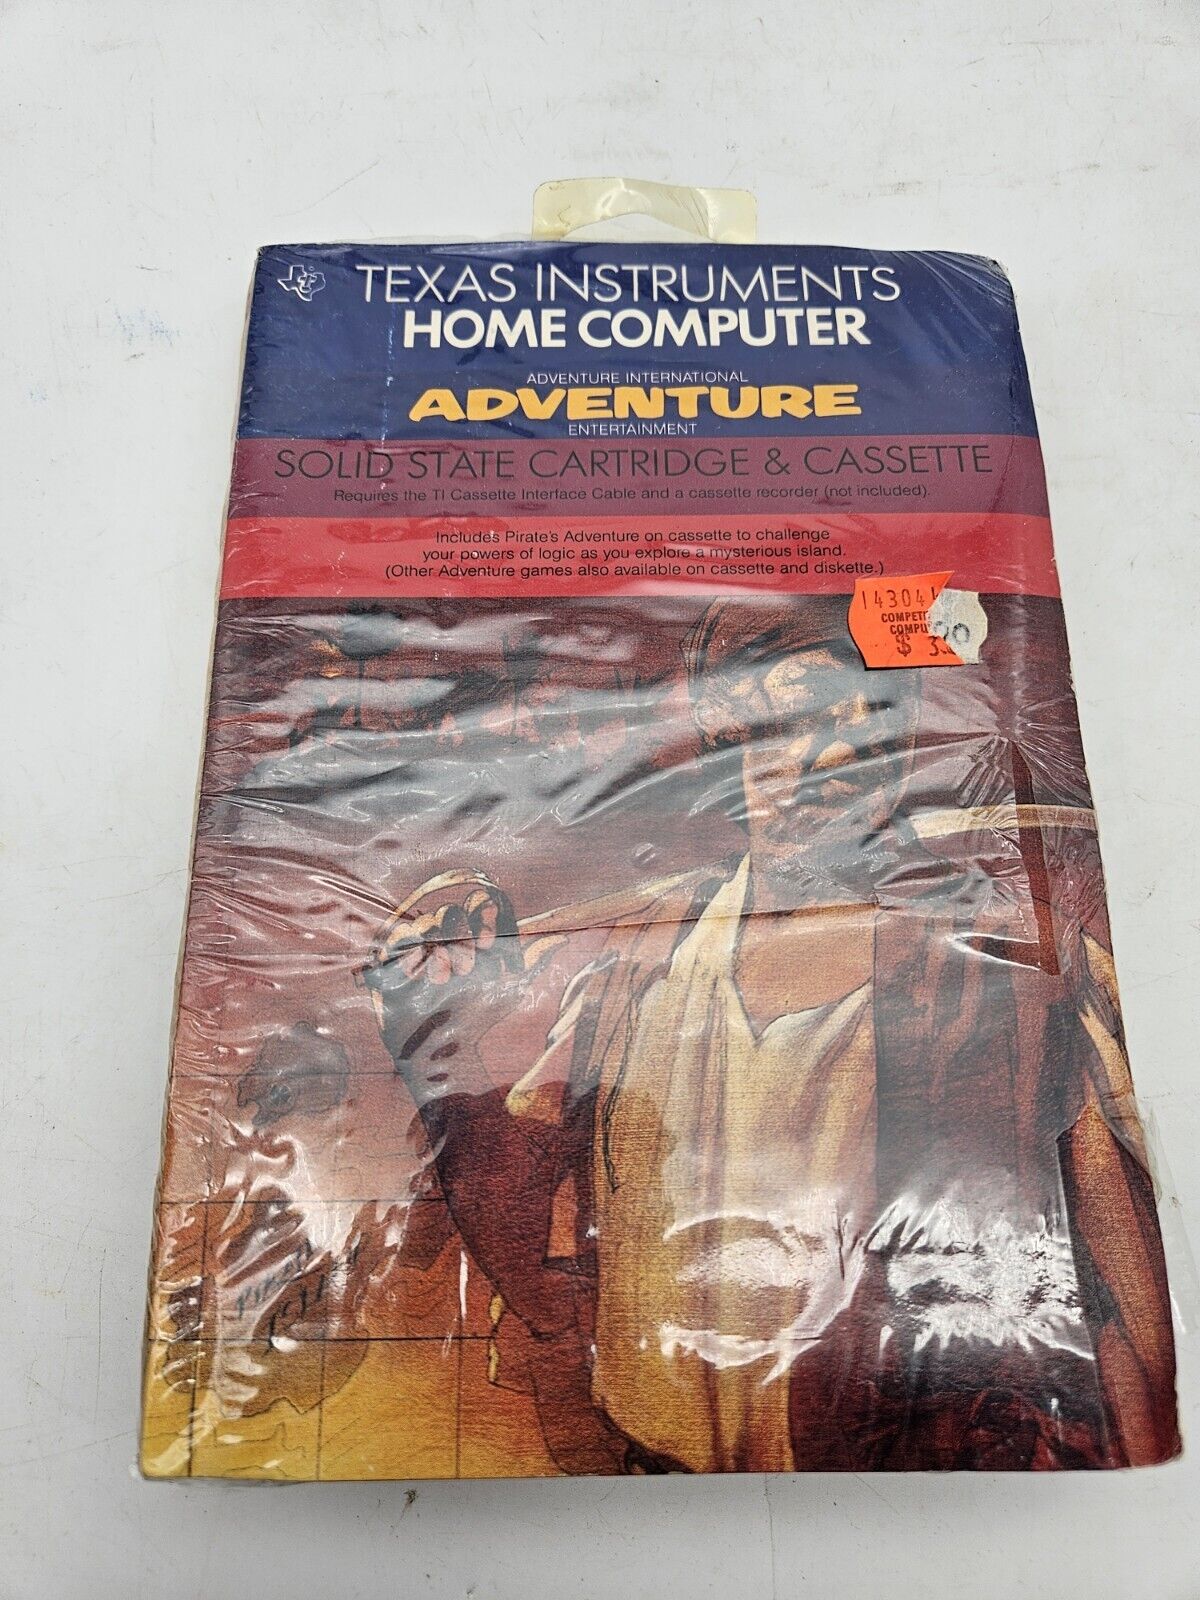 NEW Texas Instruments Home Computer Adventure Solid State Cartridge Pirate